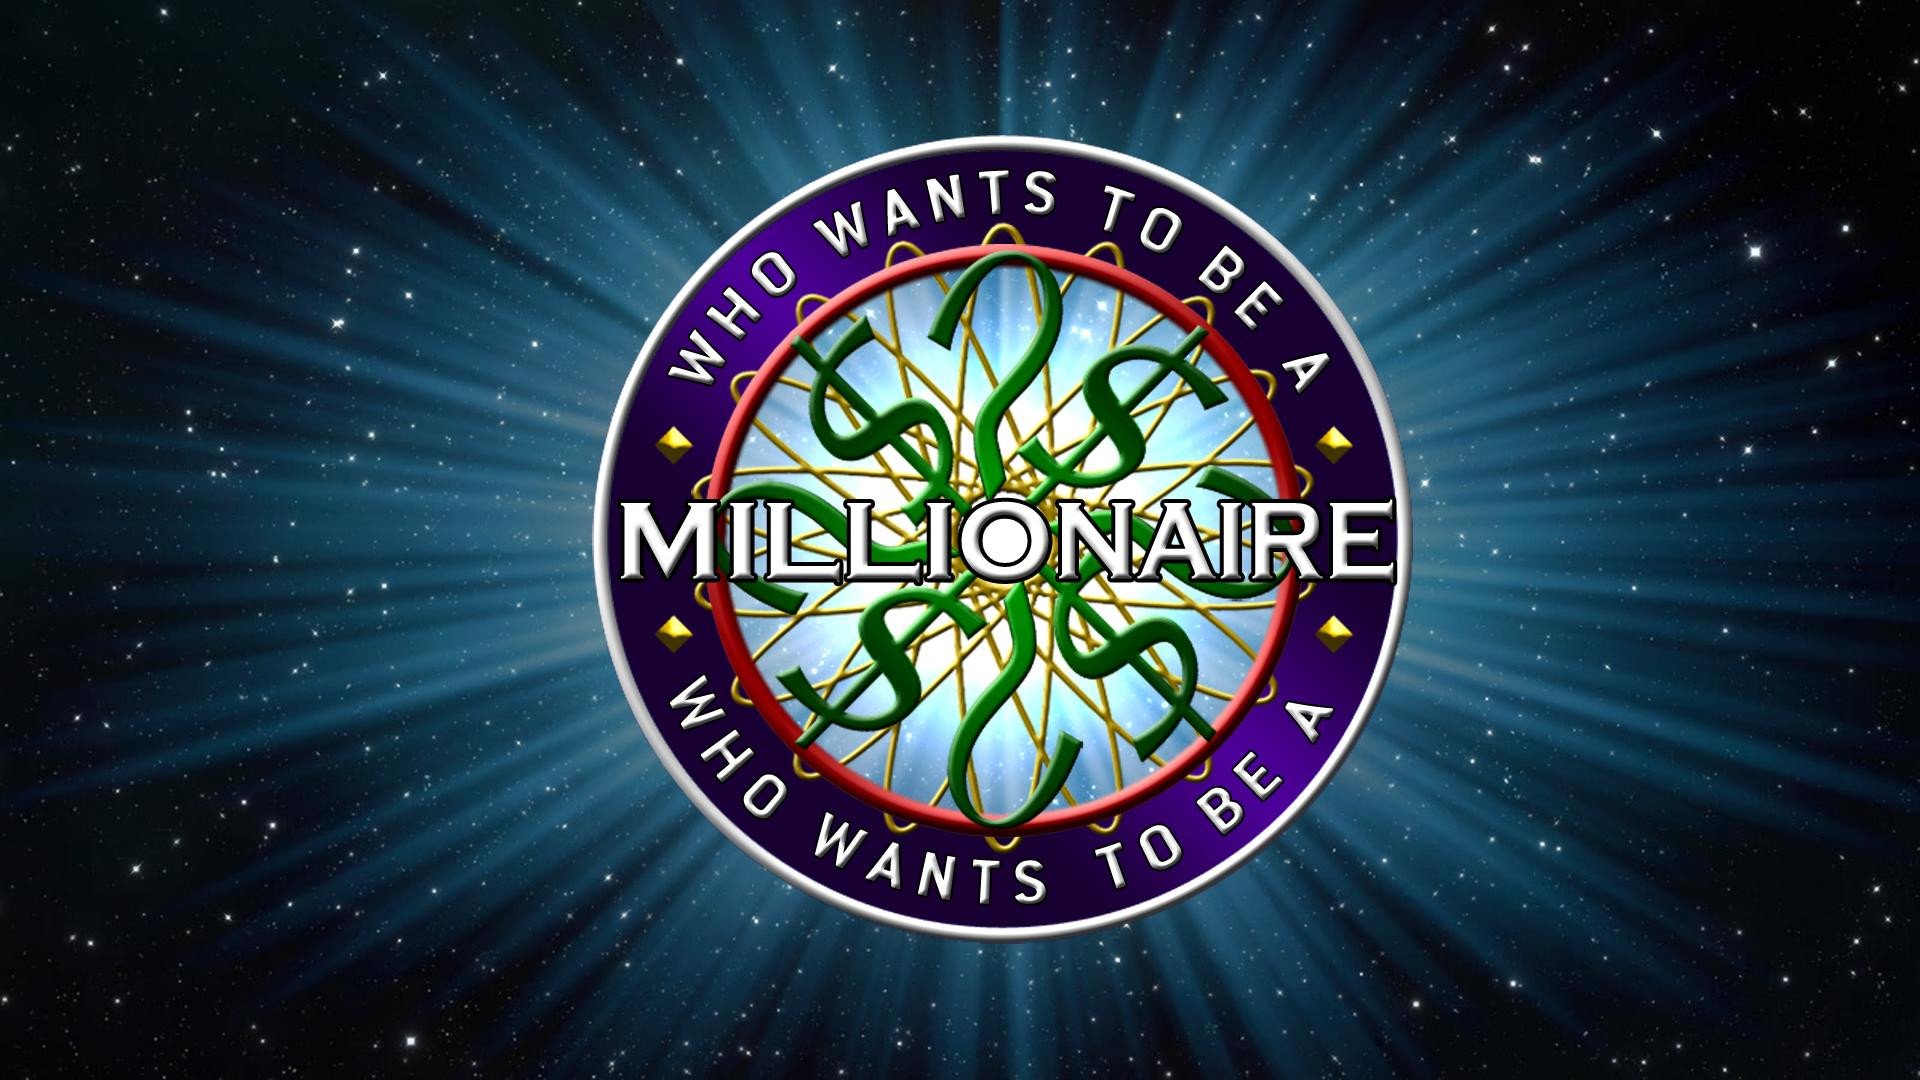 Who Wants To Be A Millionaire HD Wallpaper Background Image